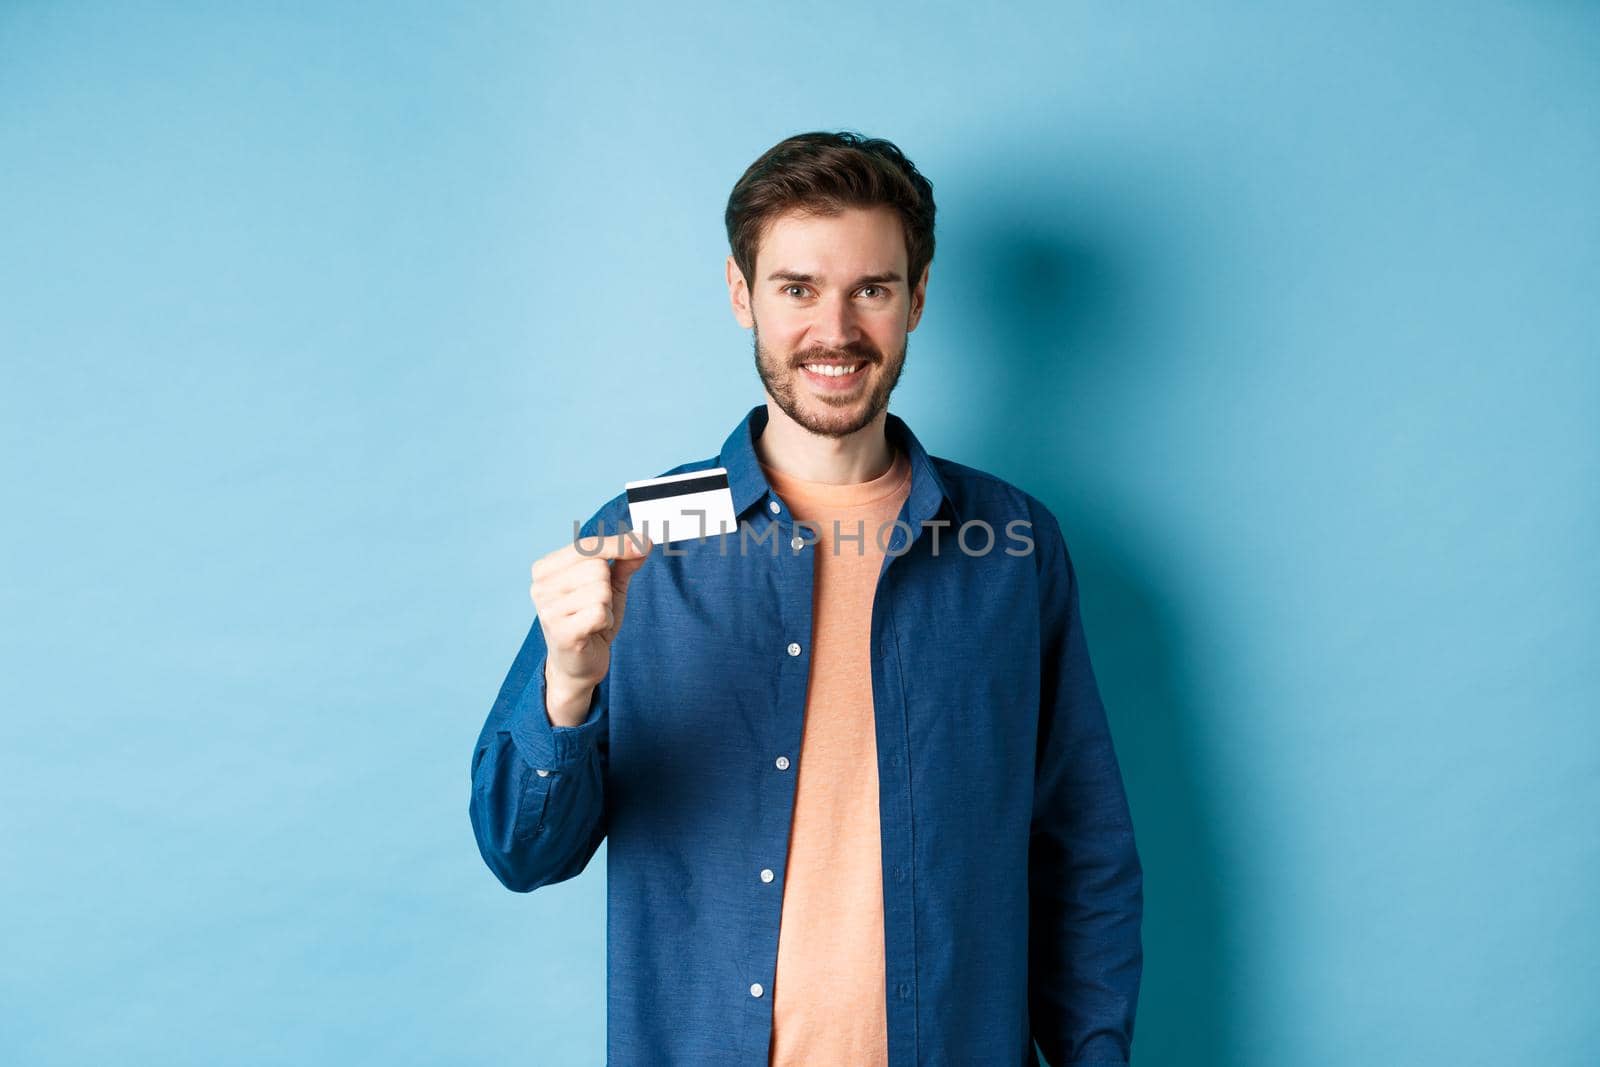 Handsome smiling guy showing plastic credit card and looking satisfied, standing on blue background.